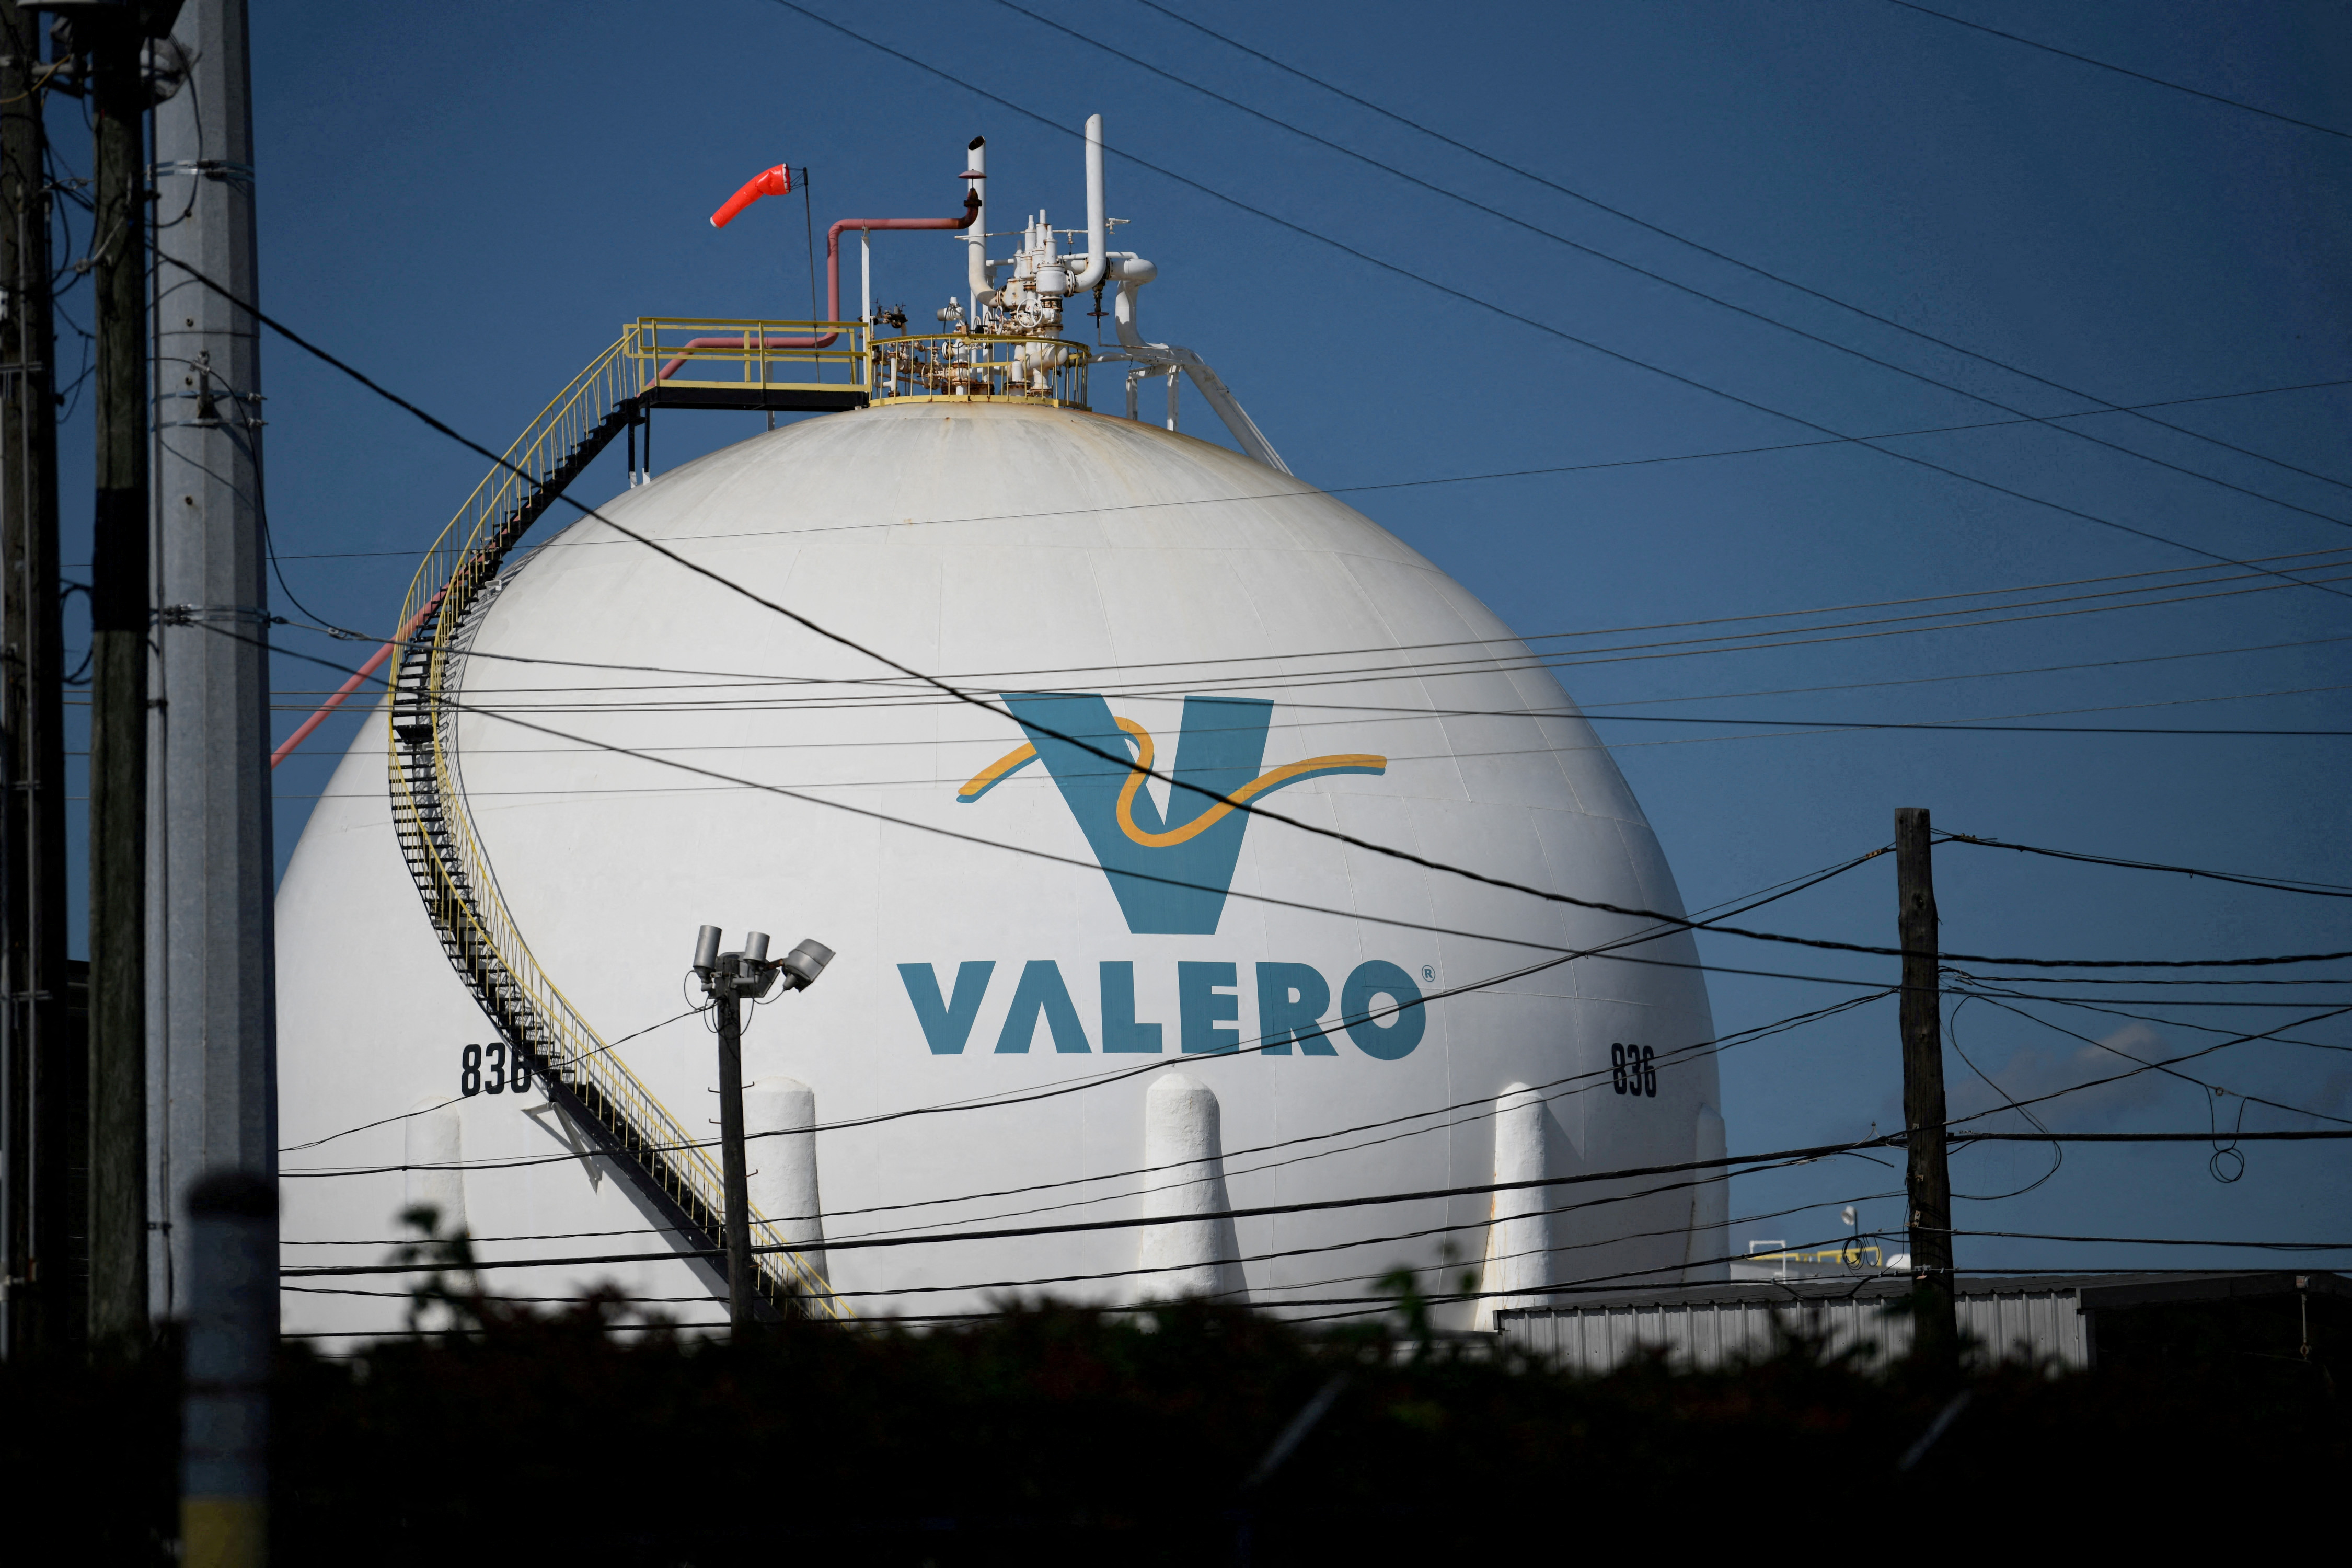 The Valero refinery next to the Houston Ship Channel is seen in Houston, Texas, U.S., May 5, 2019. REUTERS/Loren Elliott/File Photo